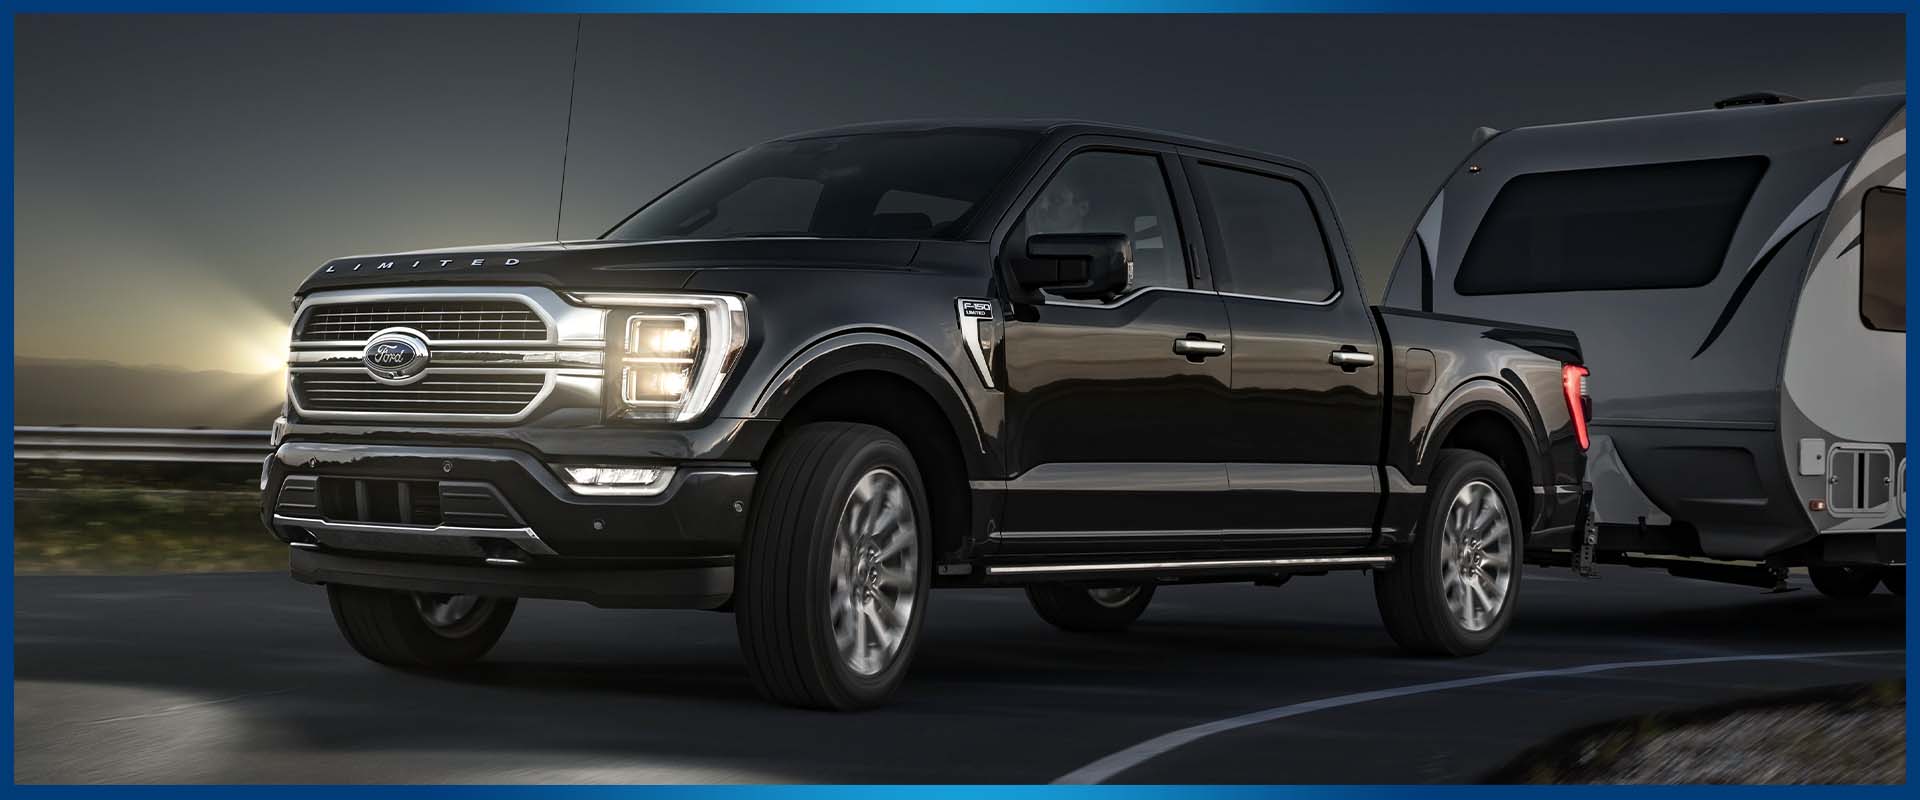 Used Ford F-150 For Sale in Randallstown, MD